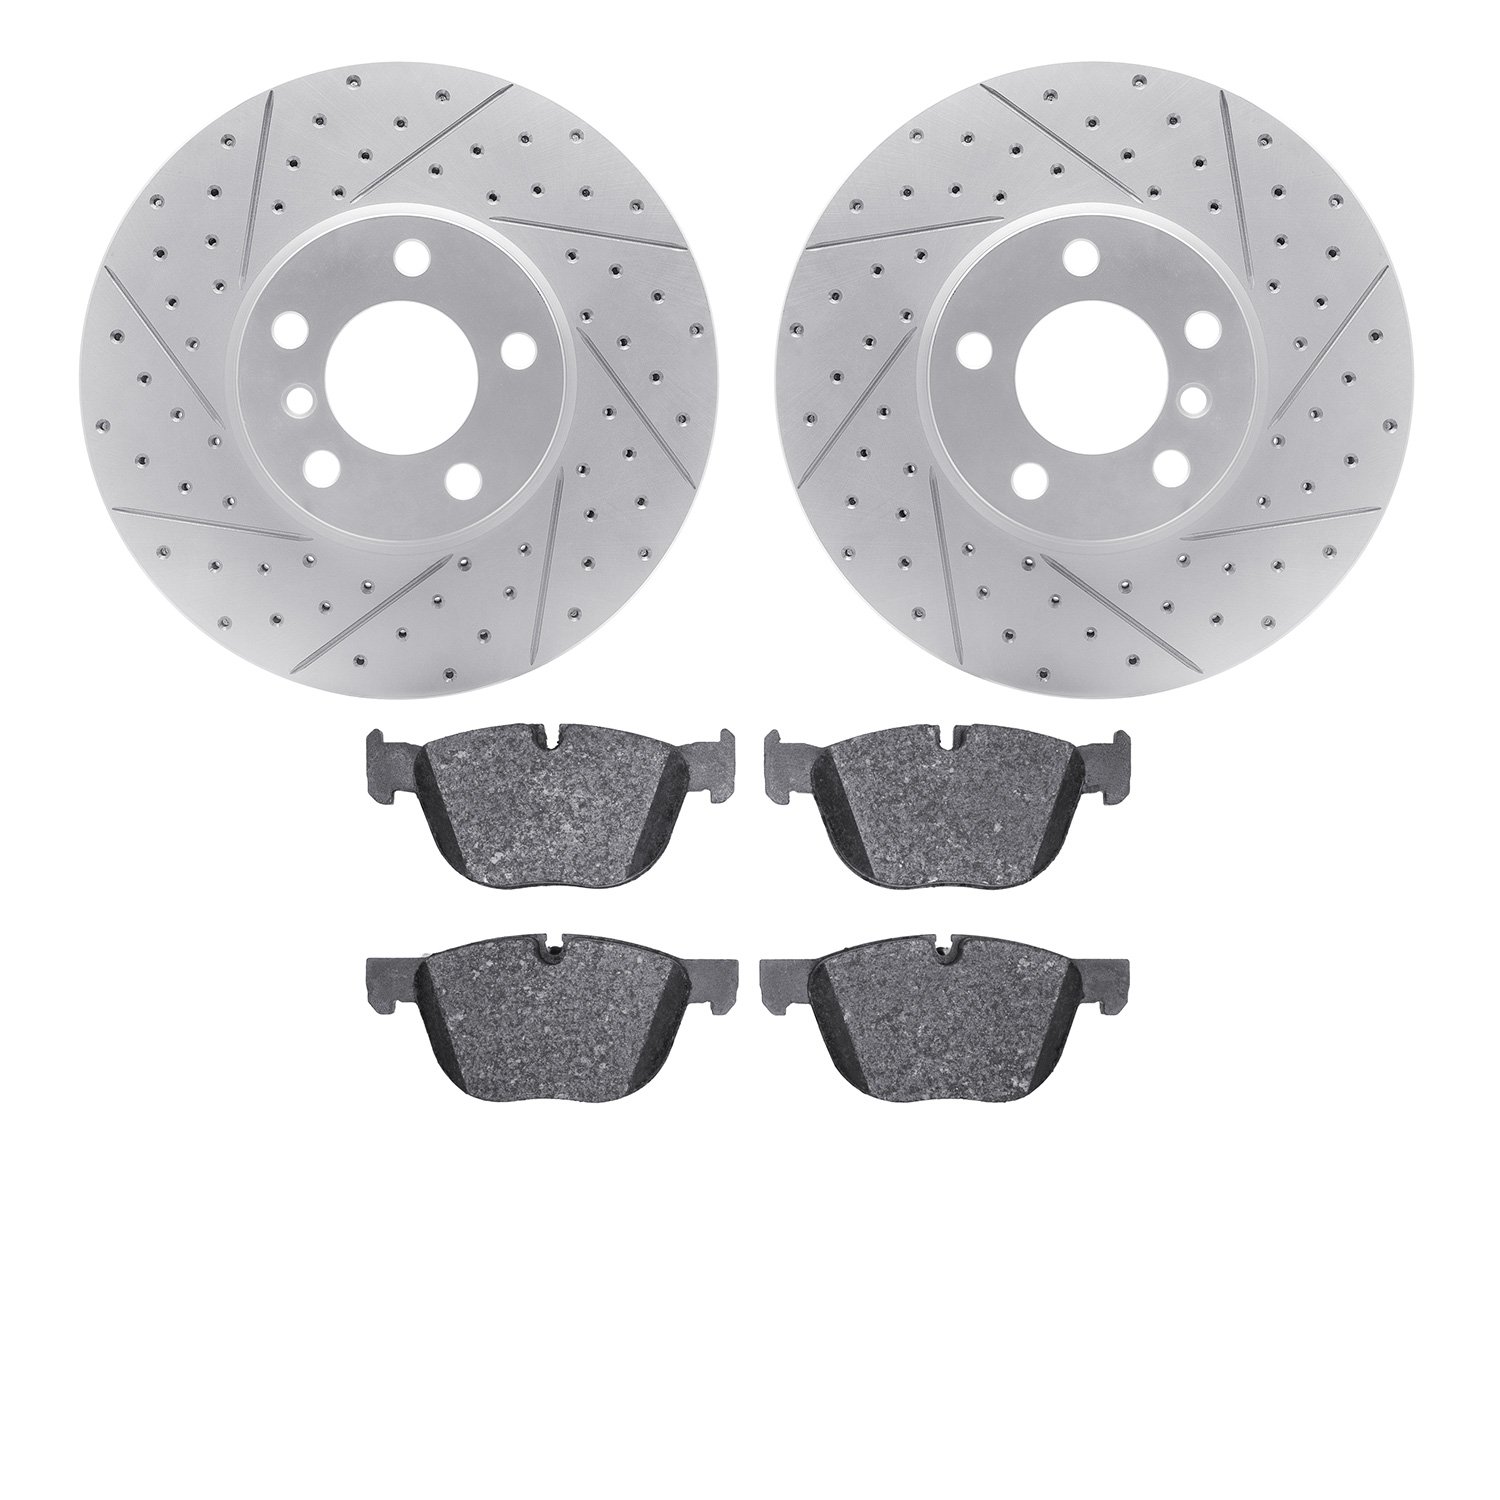 2502-31124 Geoperformance Drilled/Slotted Rotors w/5000 Advanced Brake Pads Kit, 2014-2019 BMW, Position: Front